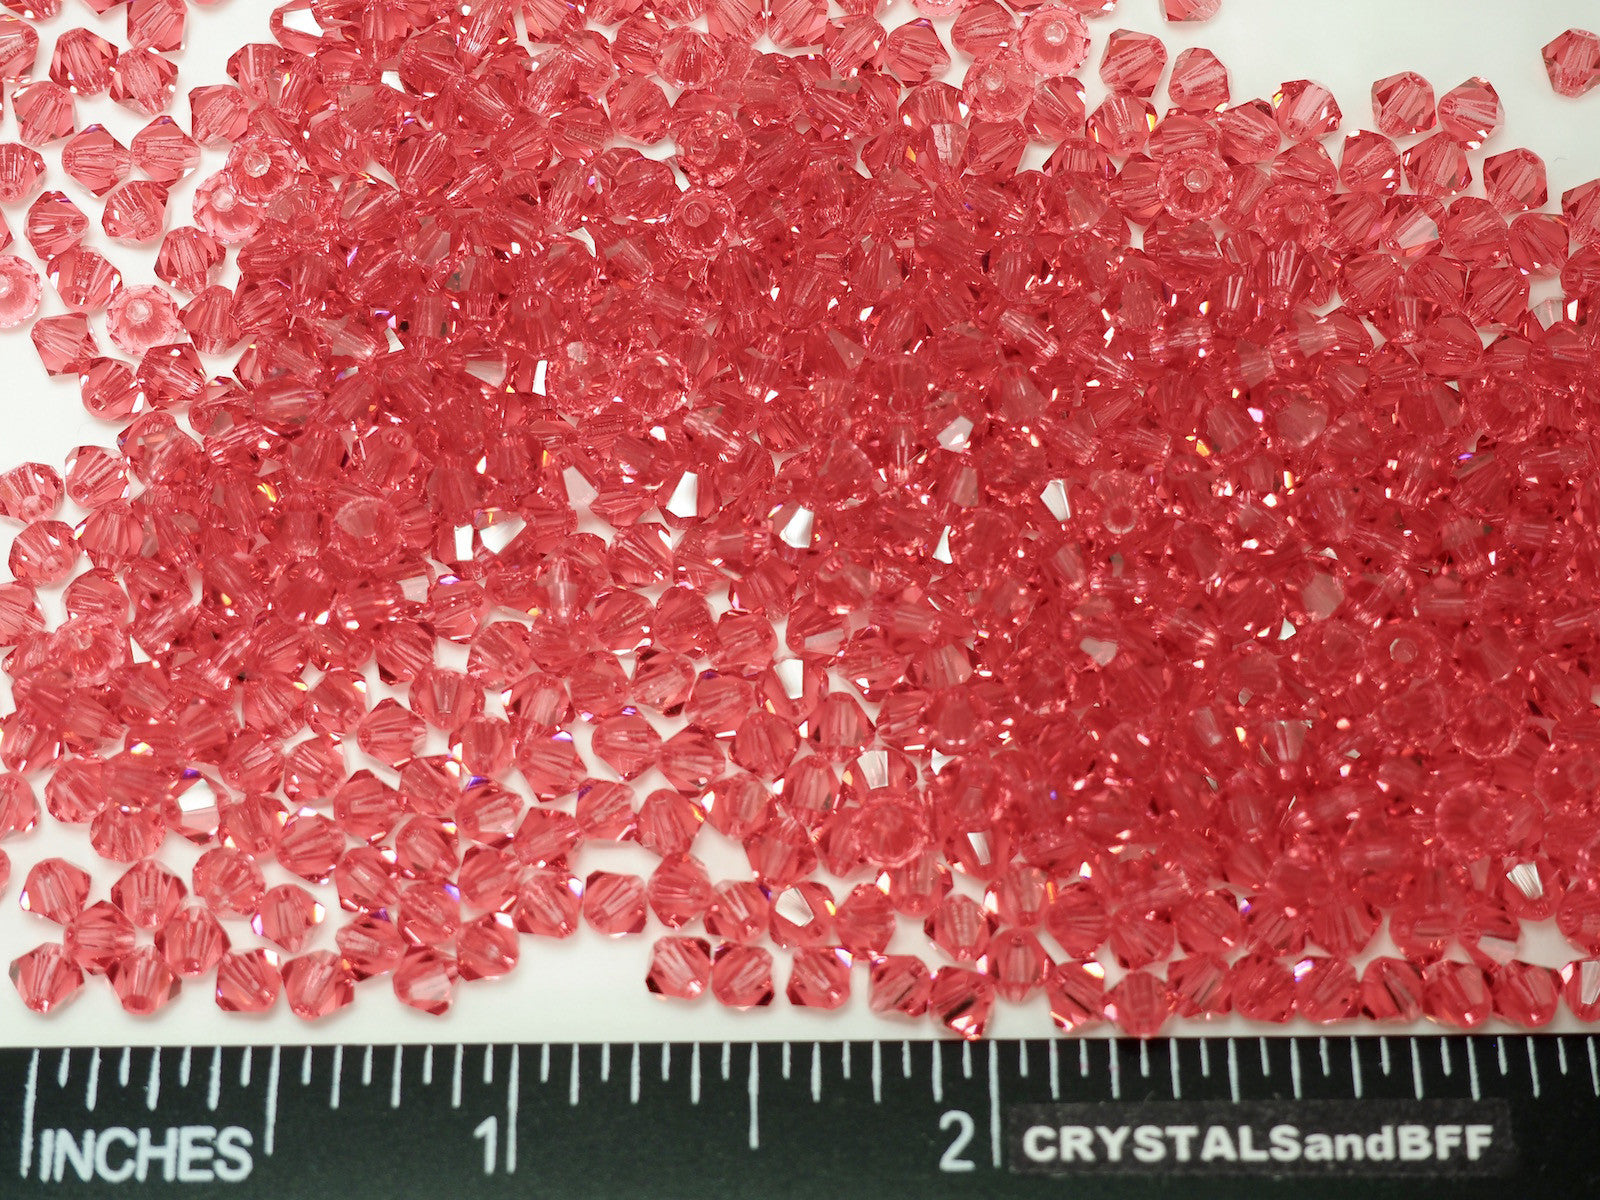 Indian Pink (Preciosa color), Czech Glass Beads, Machine Cut Bicones (MC Rondell, Diamond Shape), red pink crystals